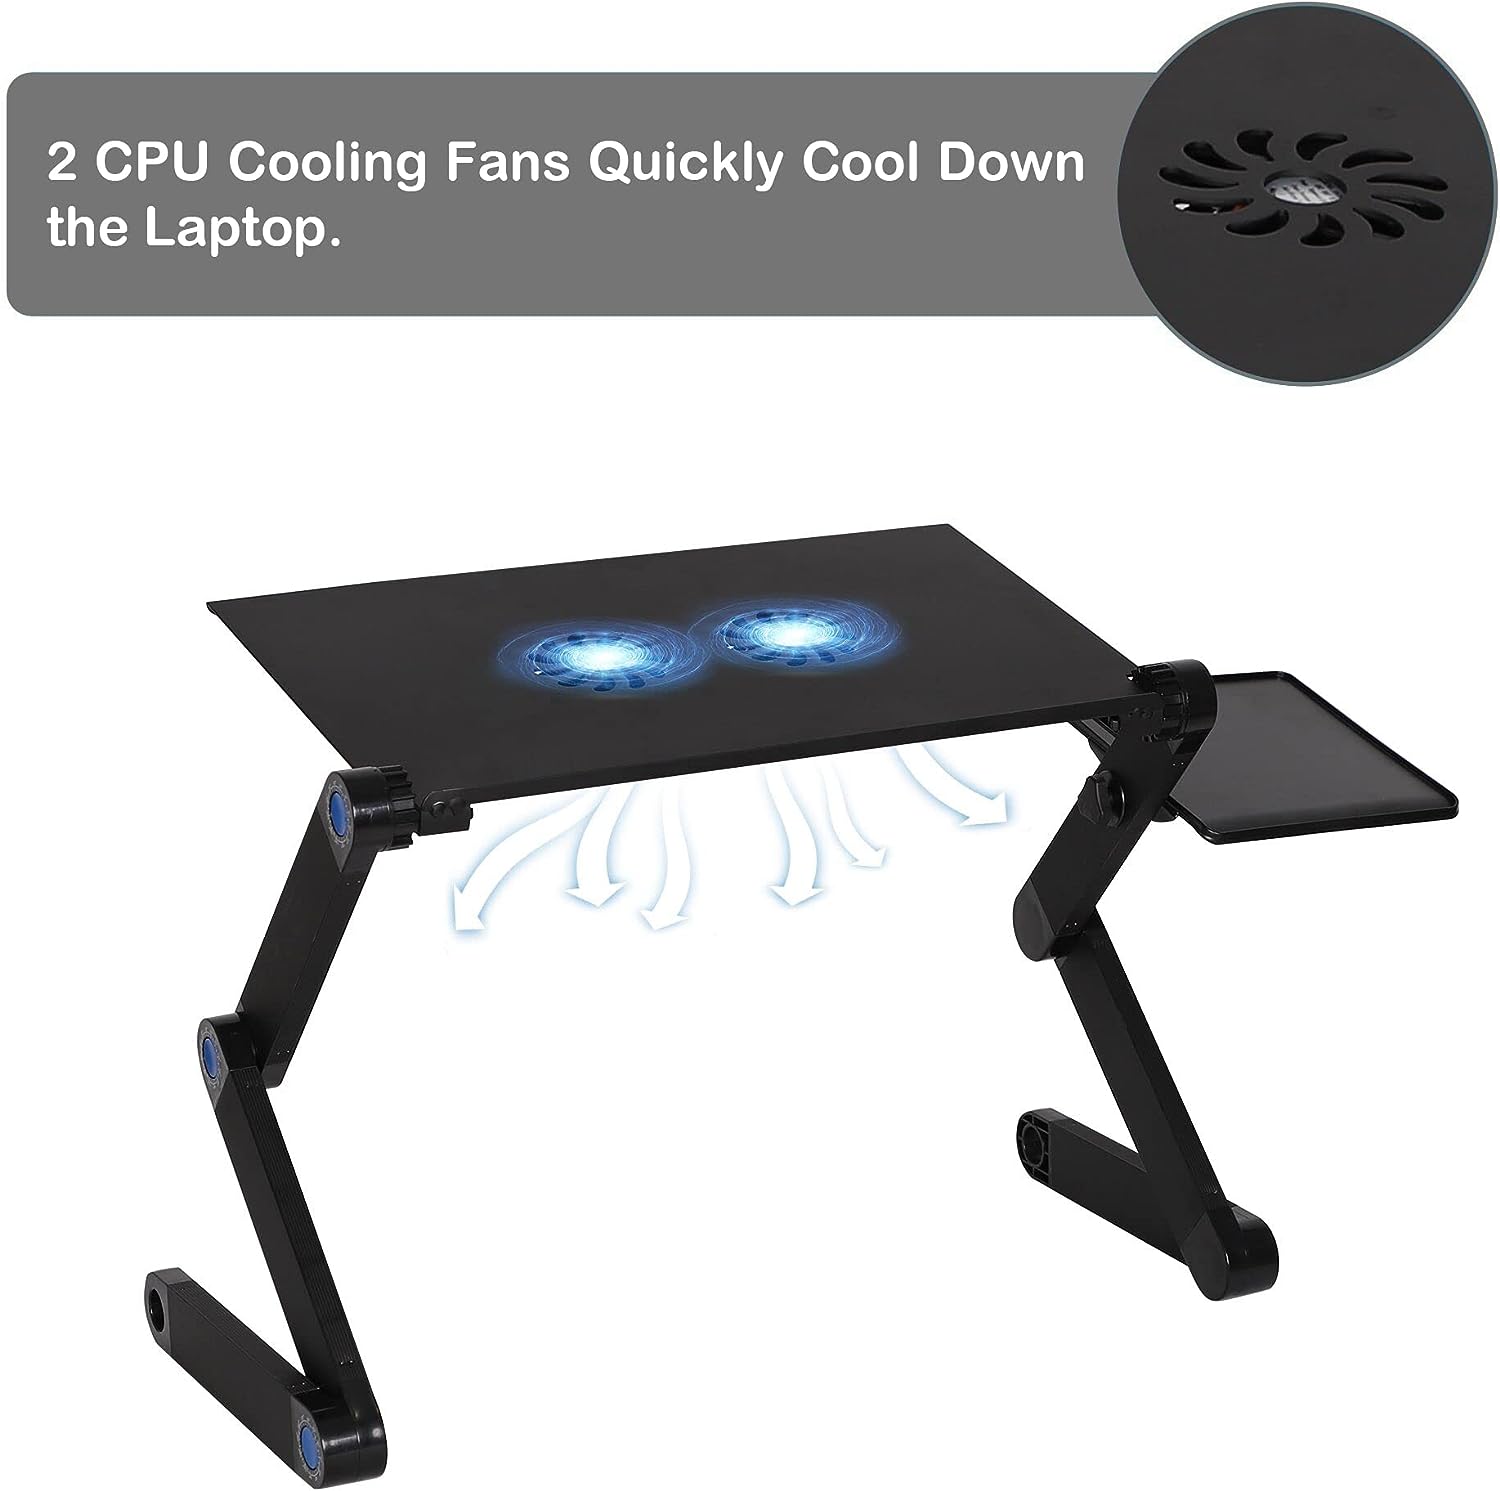 Adjustable Laptop Stand With 2 Cooling Fans and Detachable Mouse Pad Portable Folding Laptop Table Up to 17"